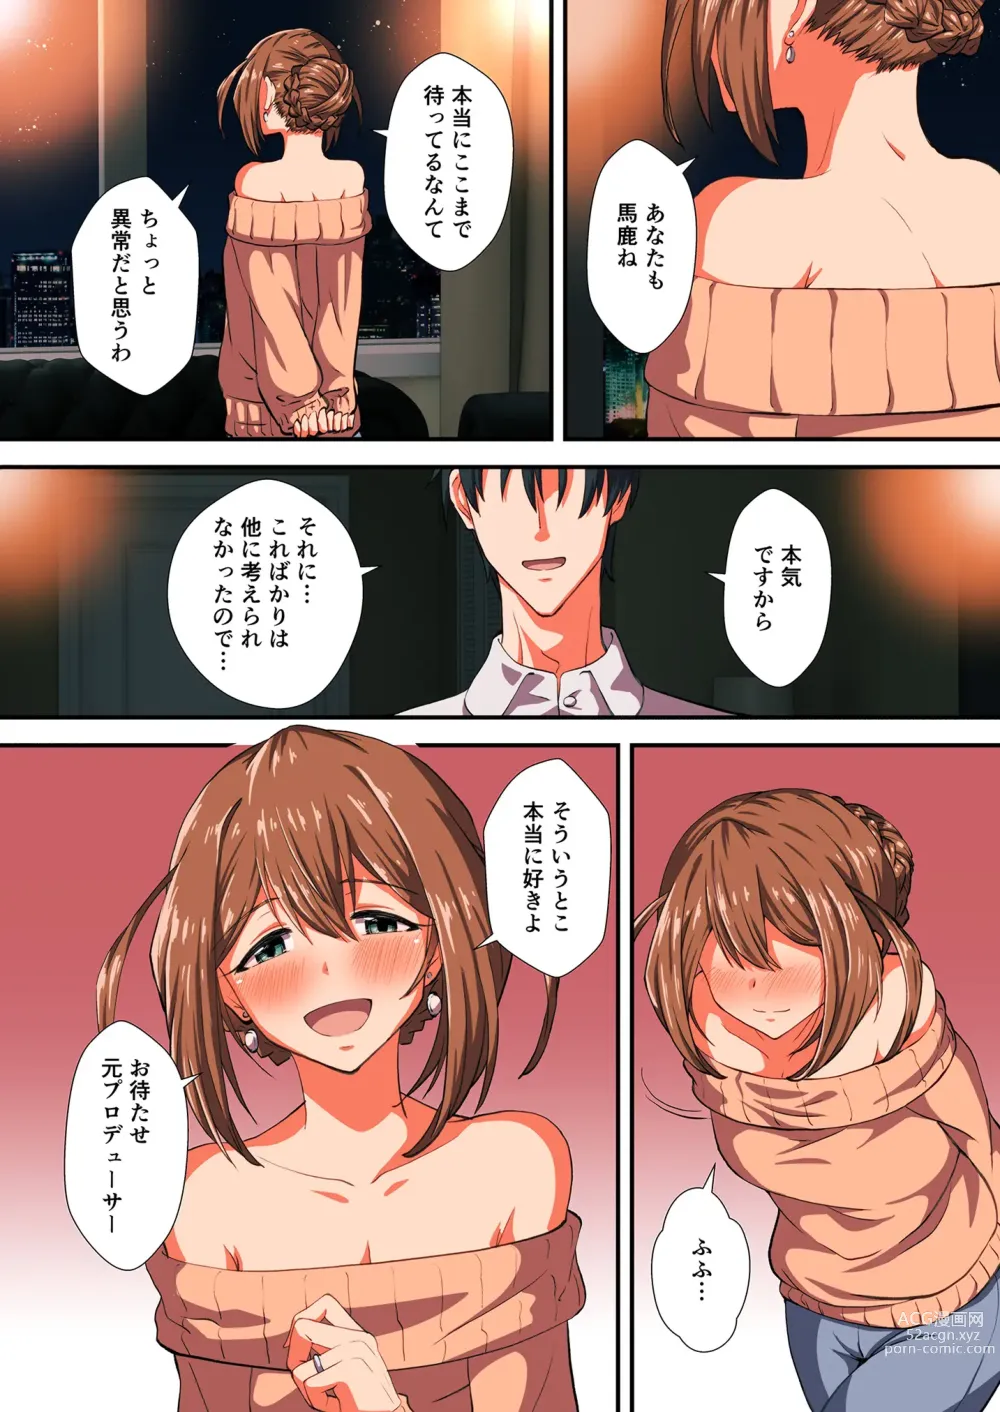 Page 69 of doujinshi 10 ye@rs after